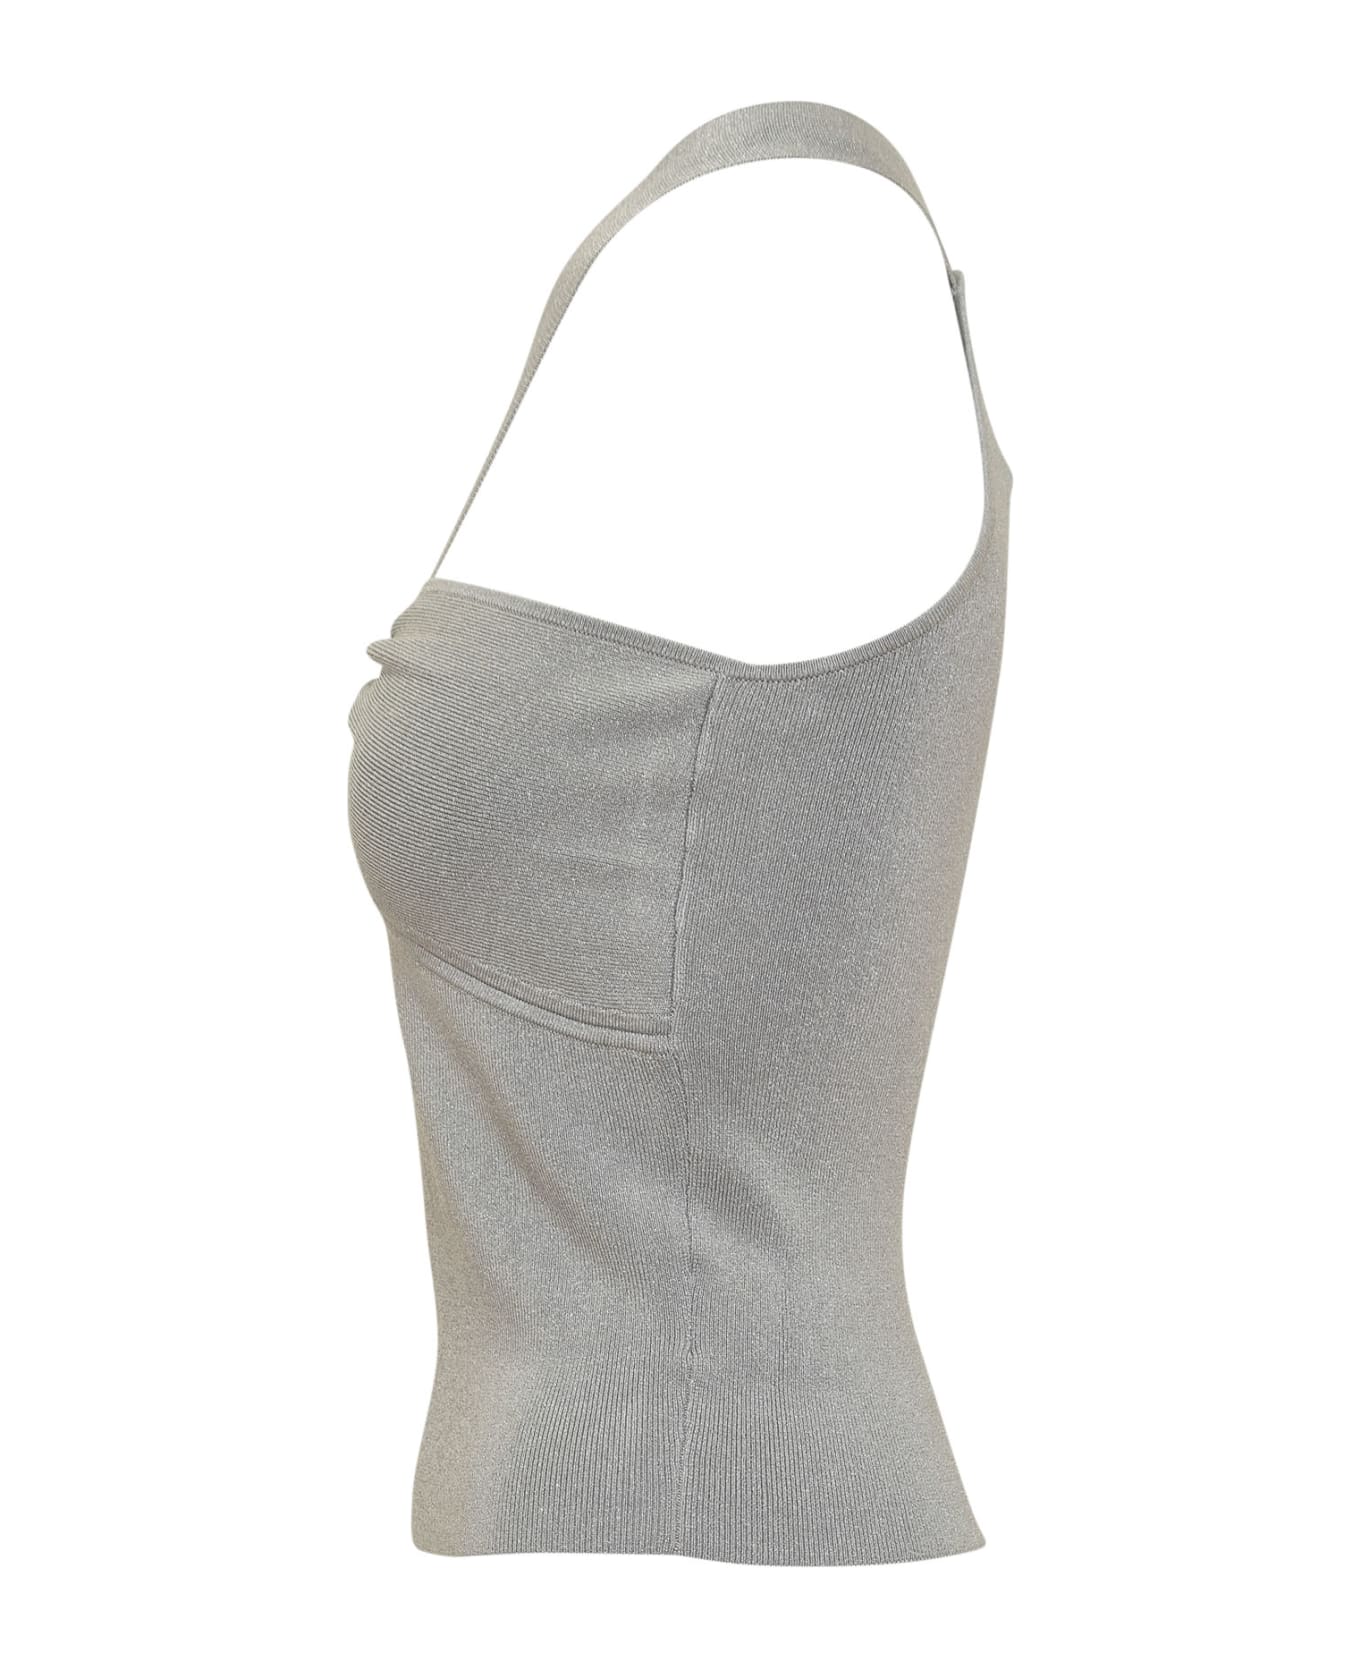 Michael Kors Top With Drop Opening - Silver